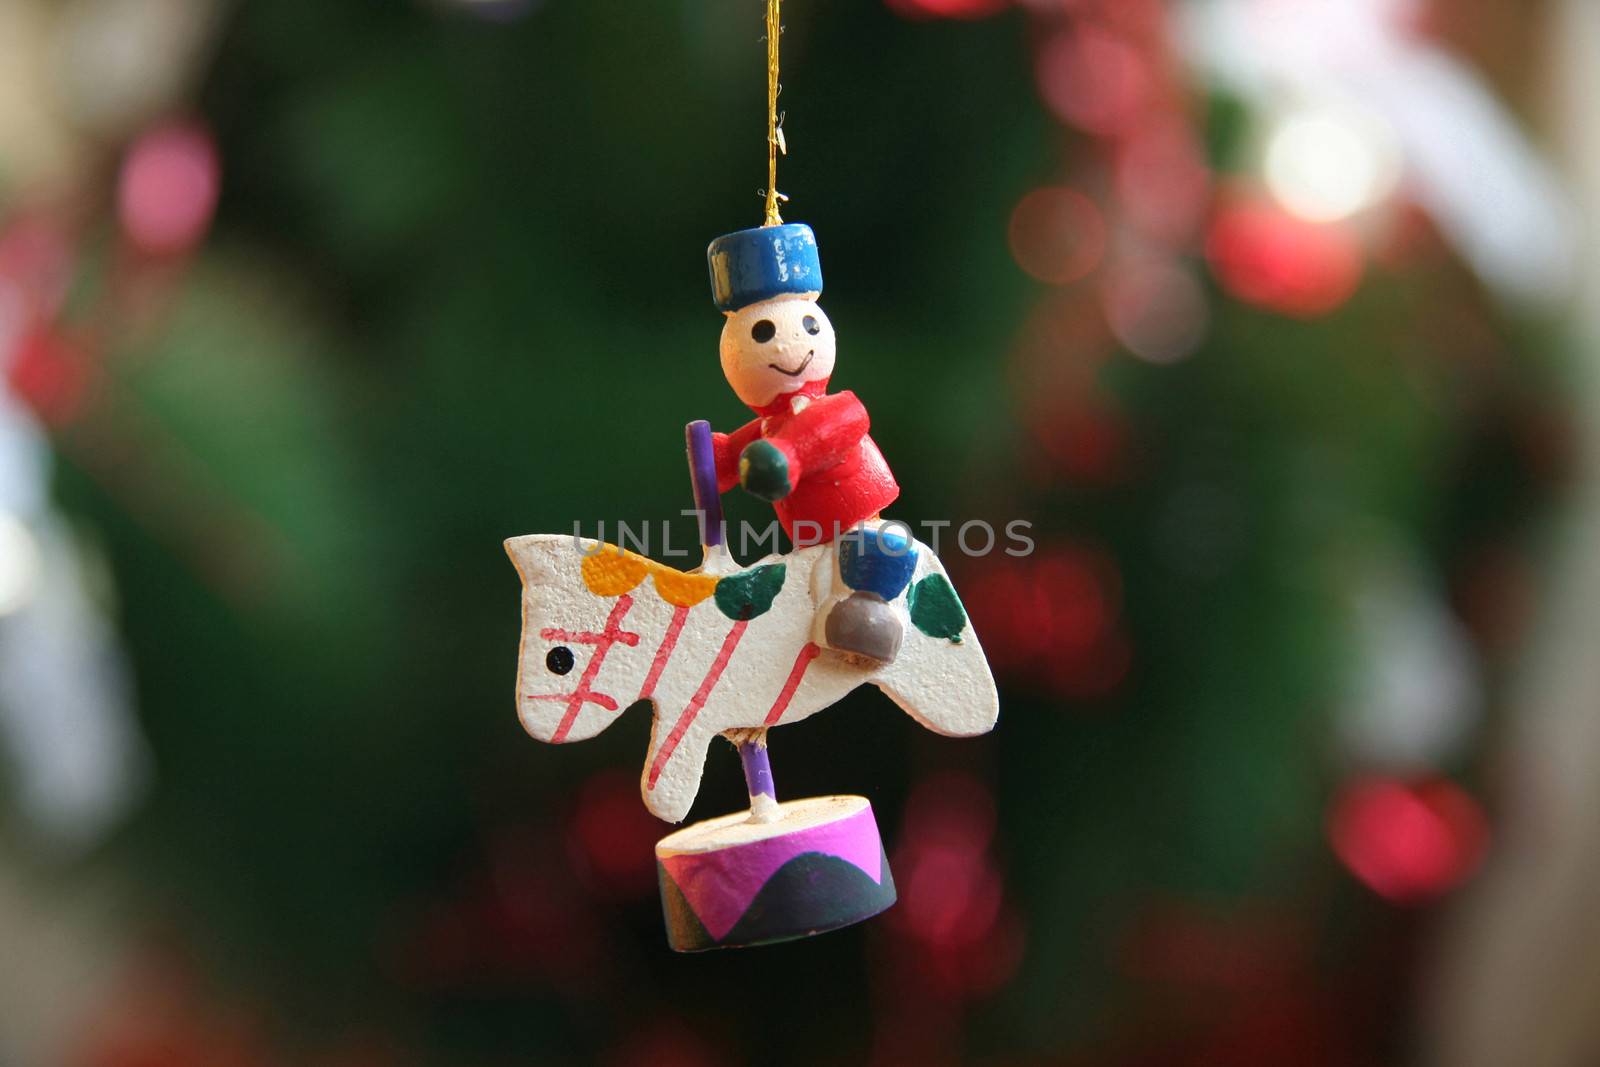 Wooden Christmas tree ornament of a smiling child riding a carousel horse.